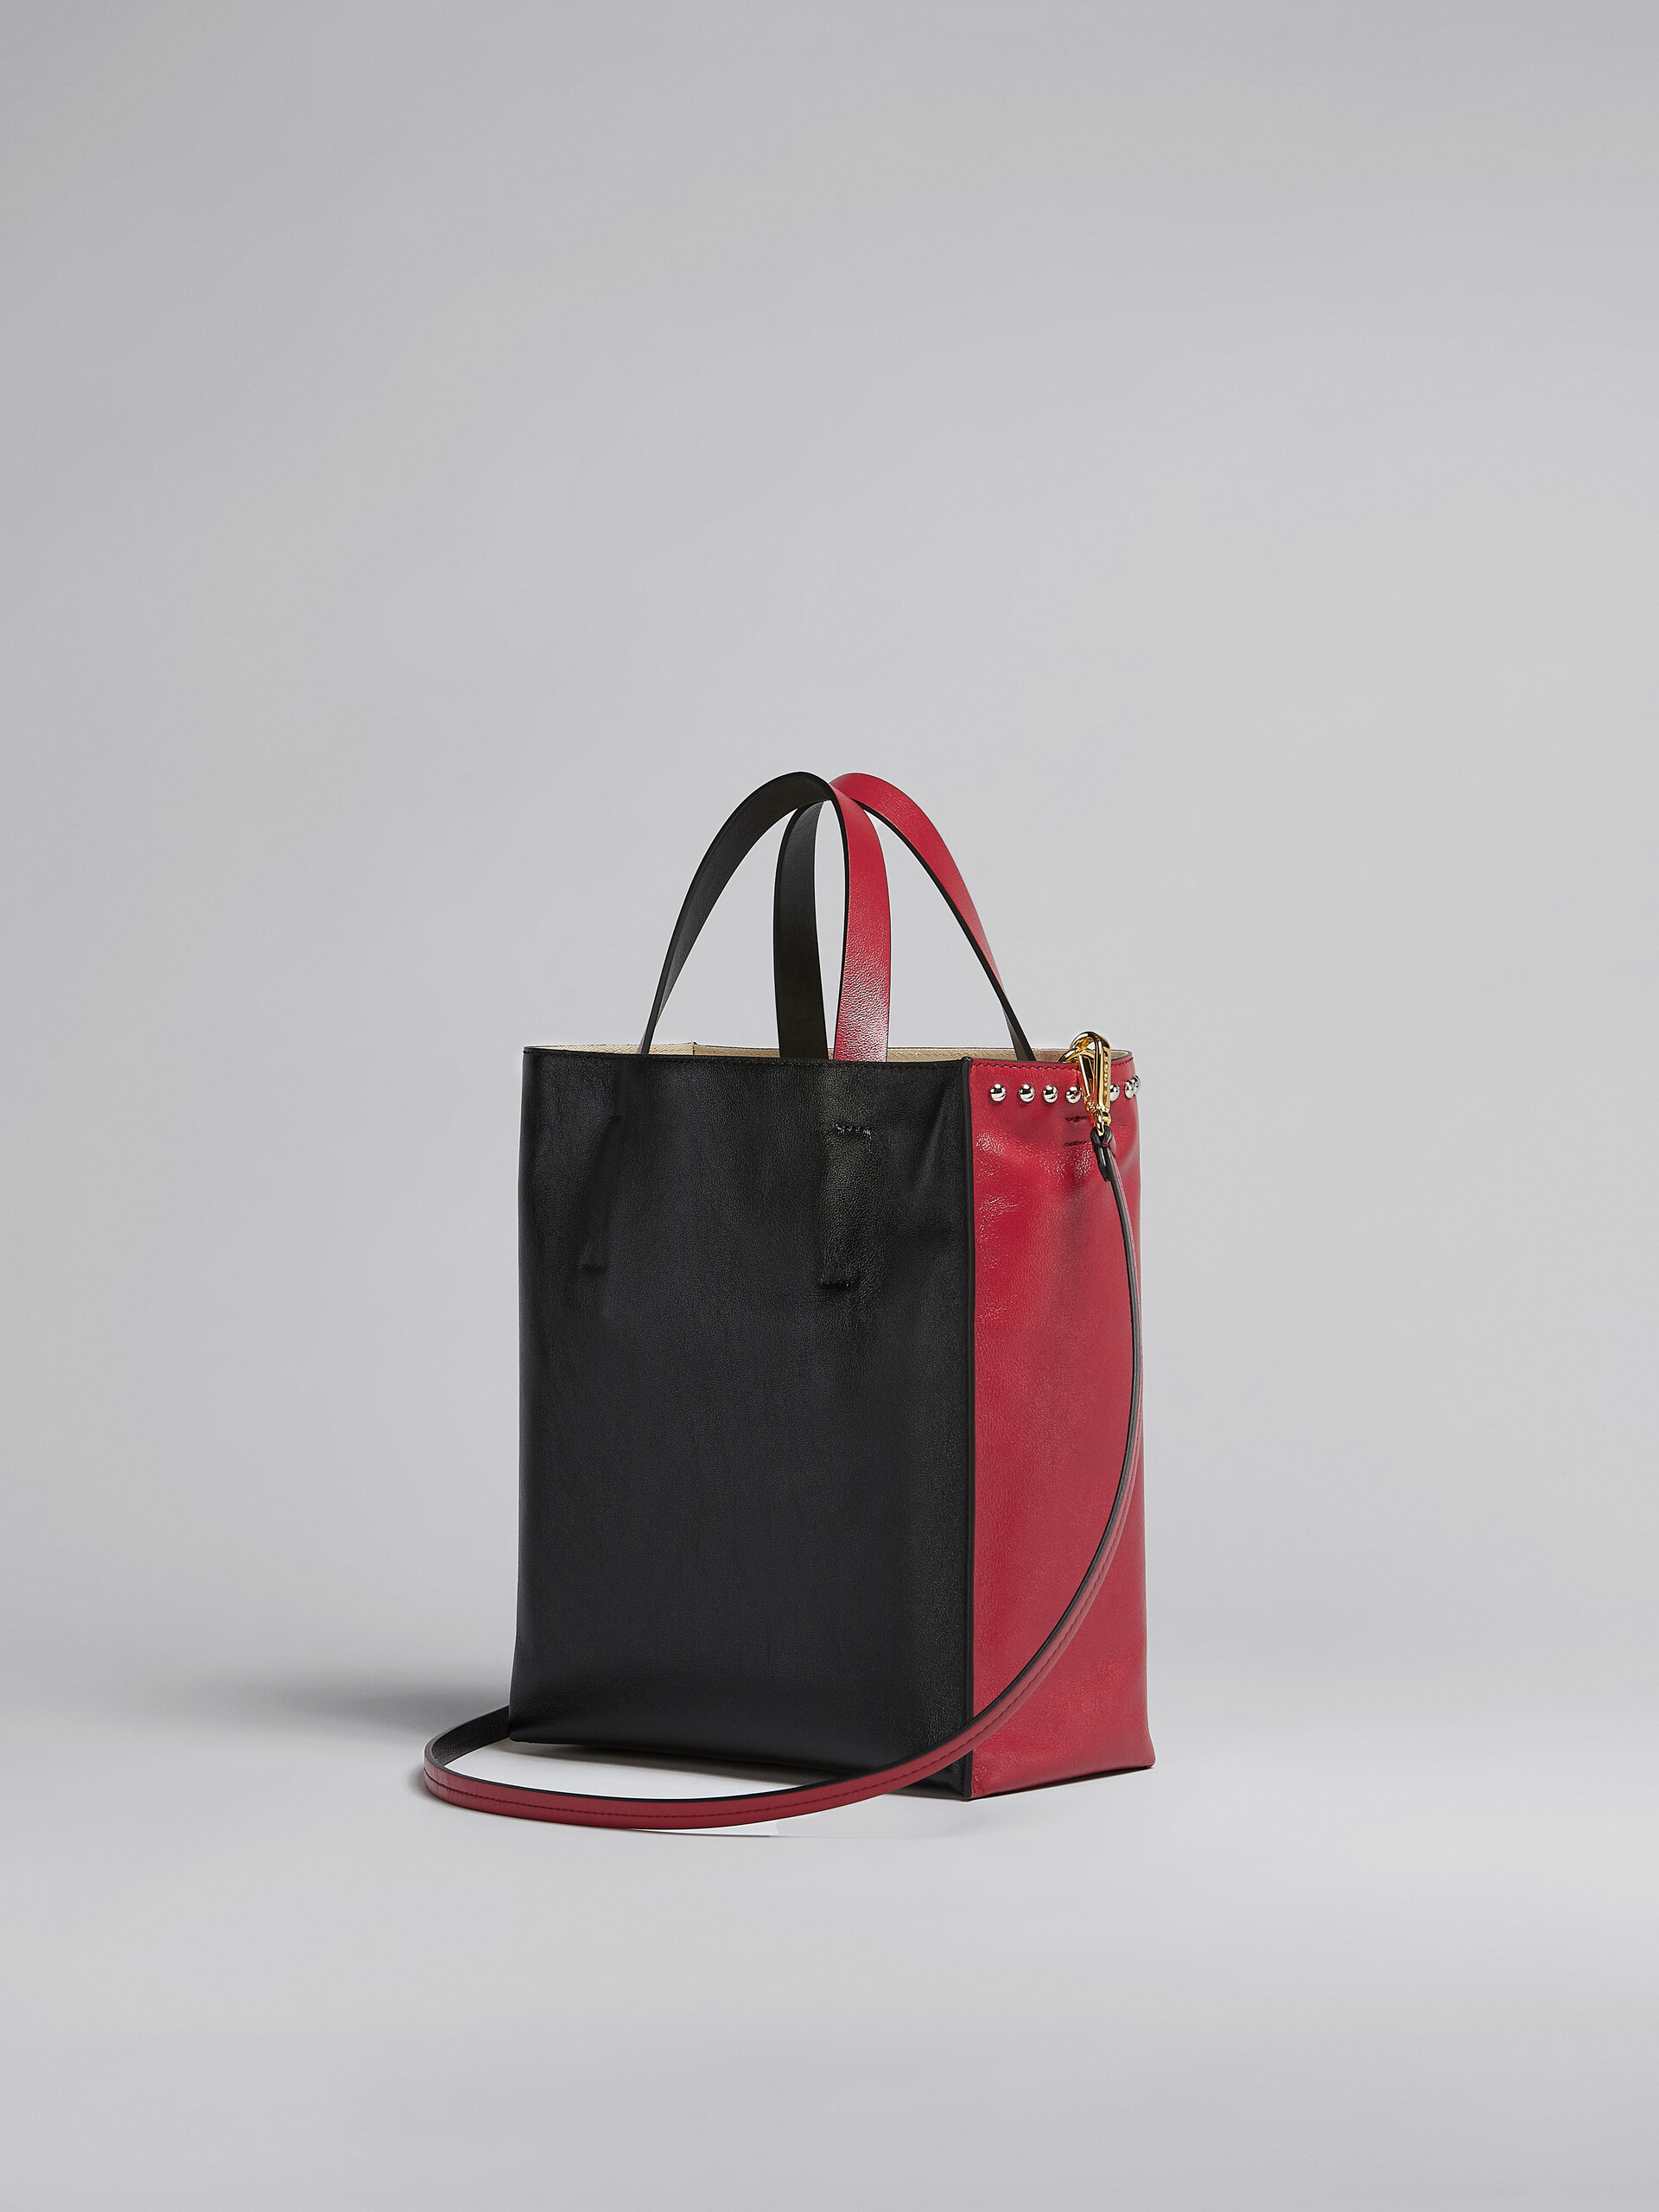 Museo Soft Small Bag in red and black leather with studs - Shopping Bags - Image 3